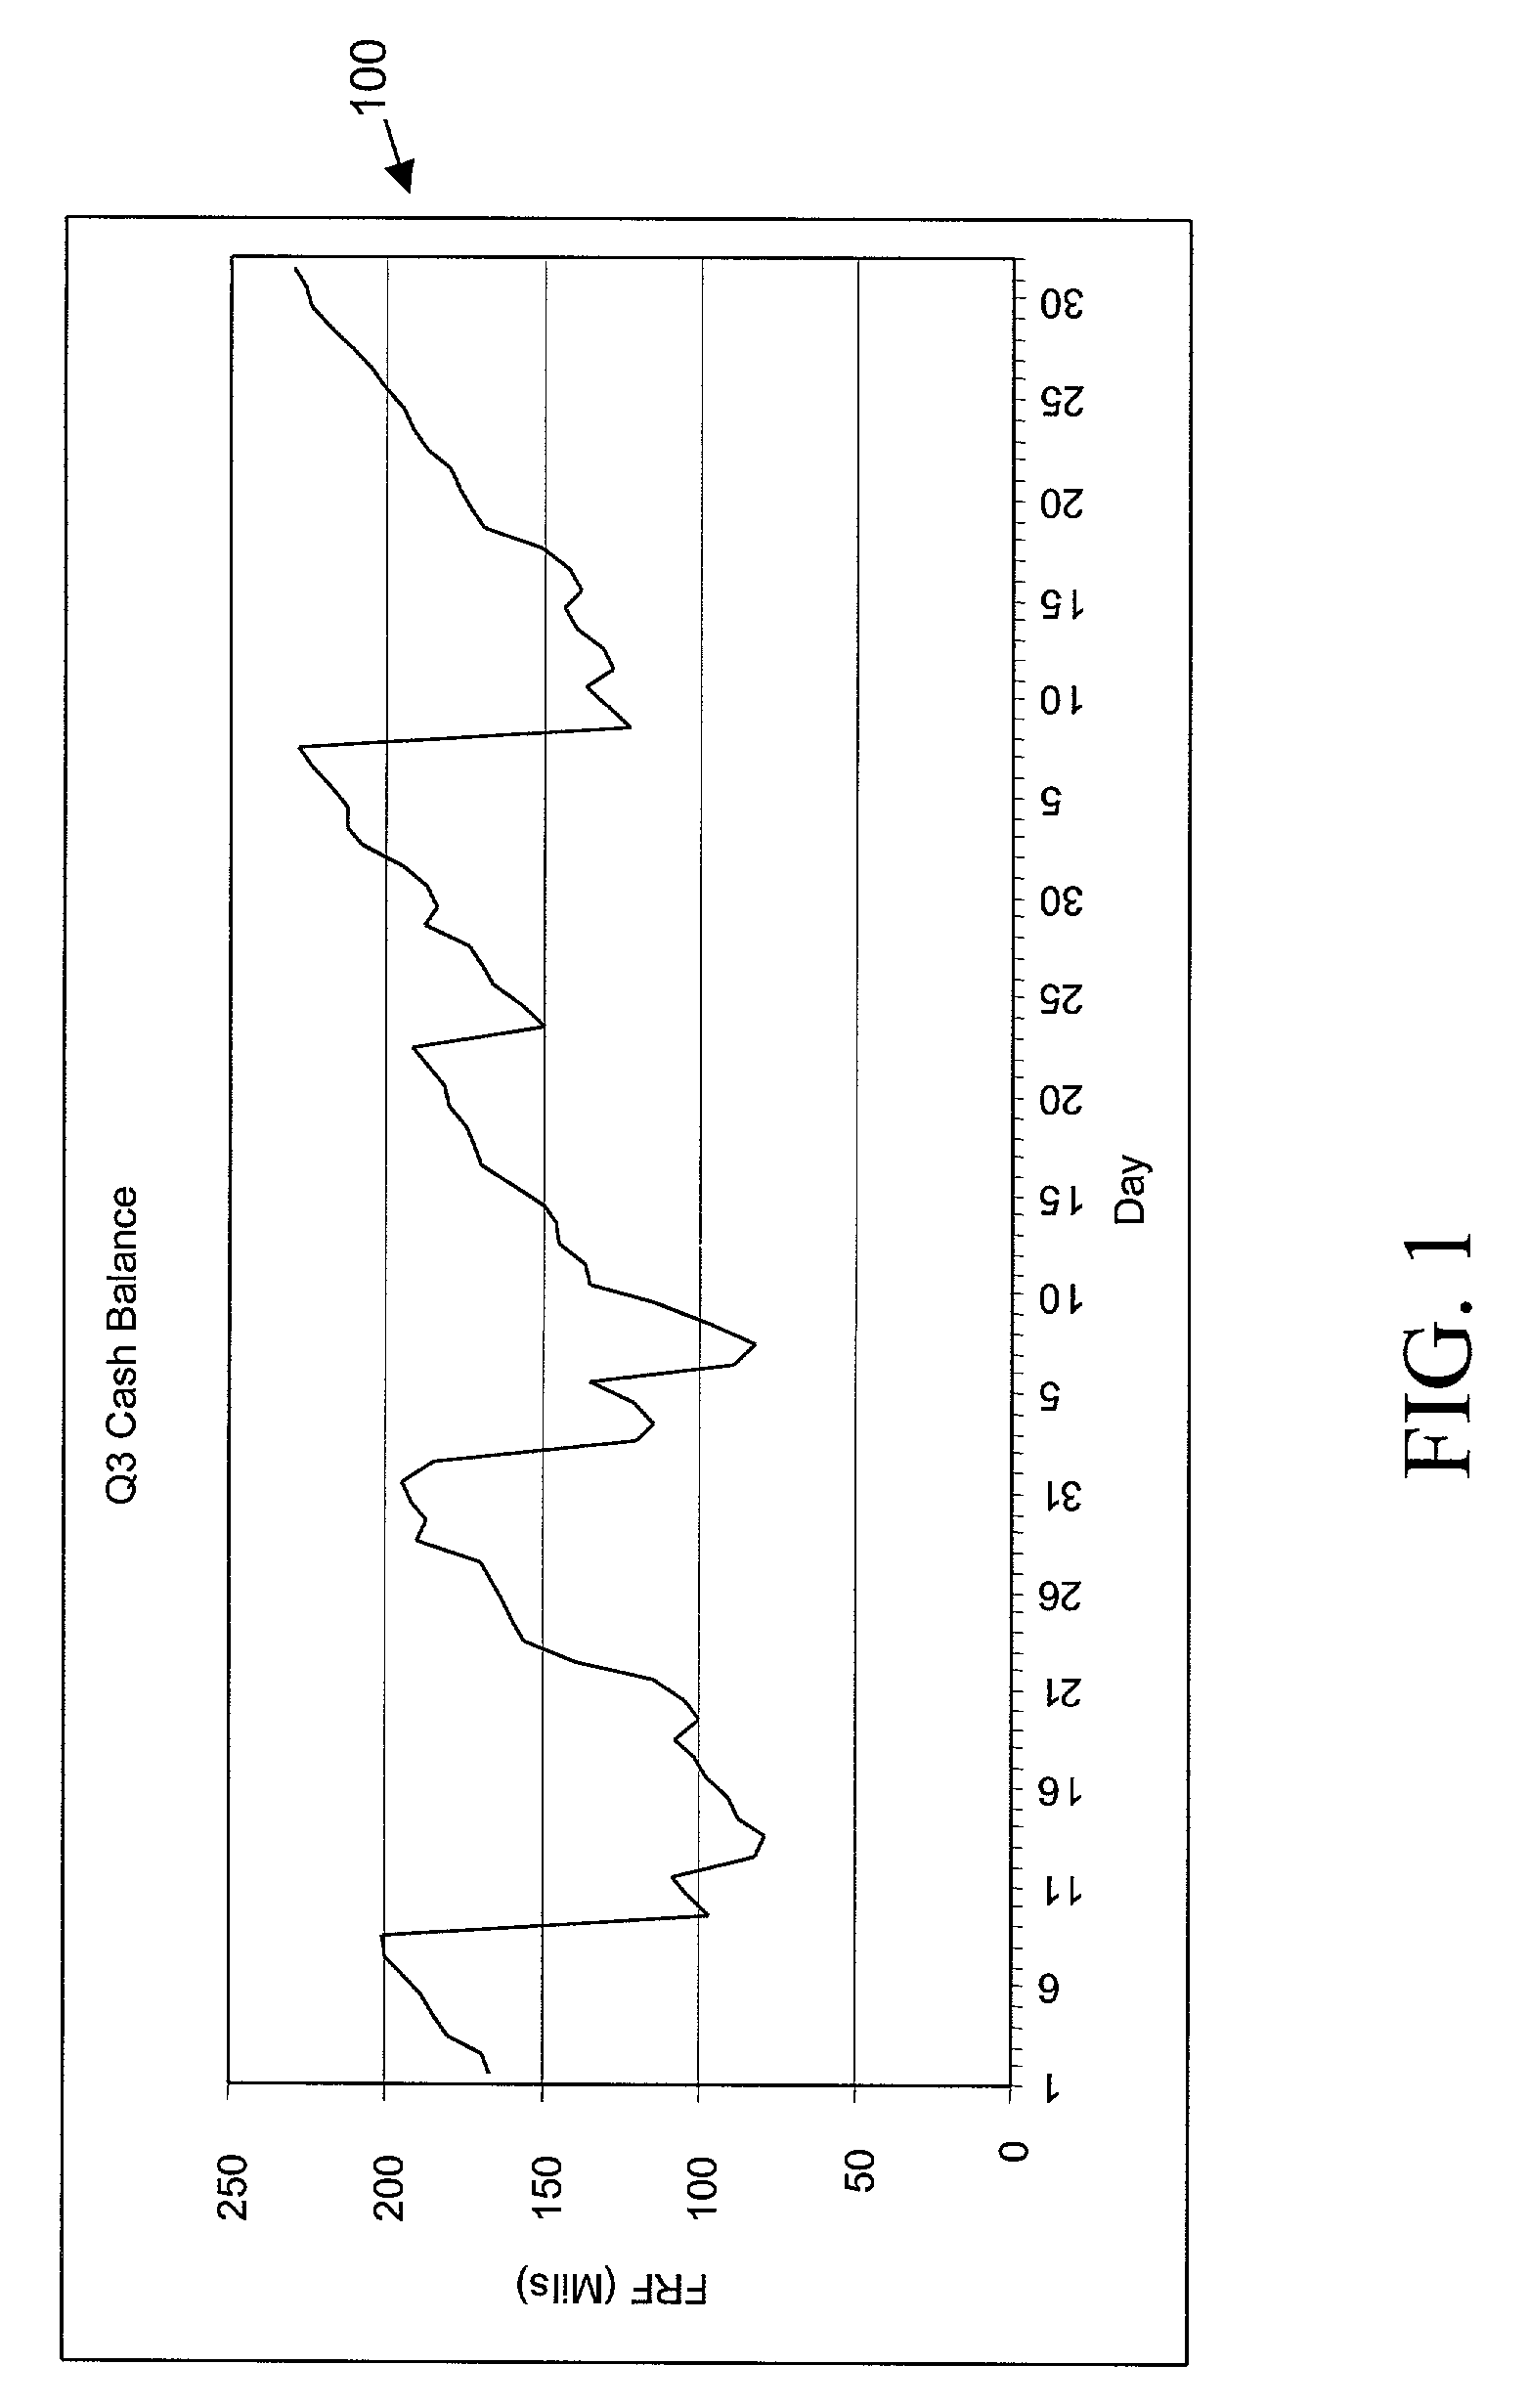 System and method for measuring and utilizing pooling analytics